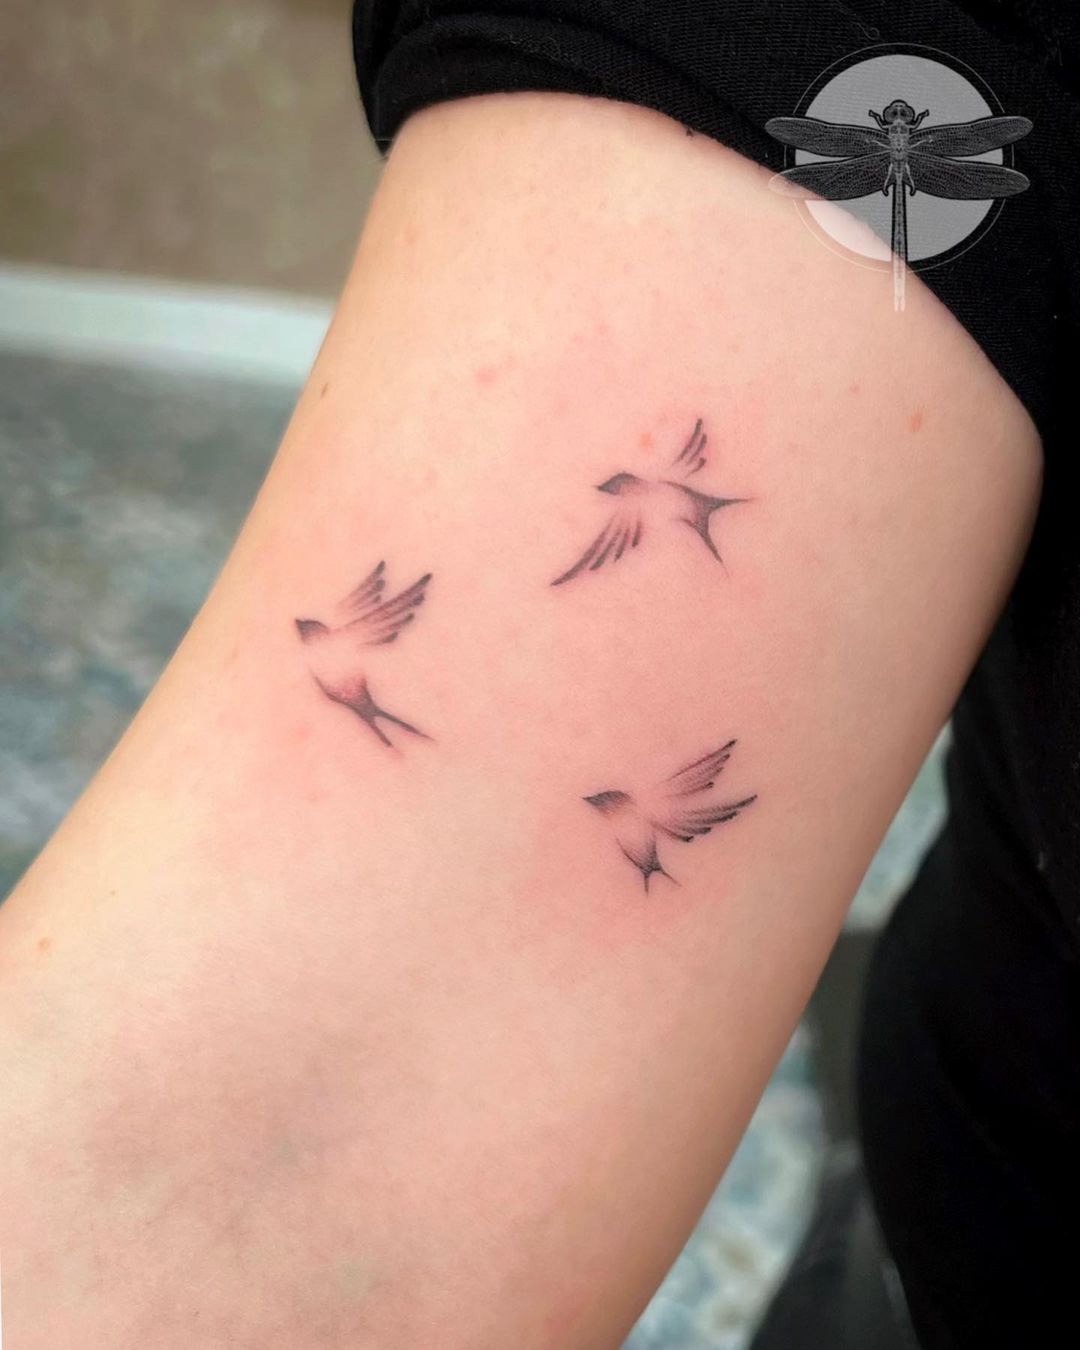 Small tattoo design by dragonflyink